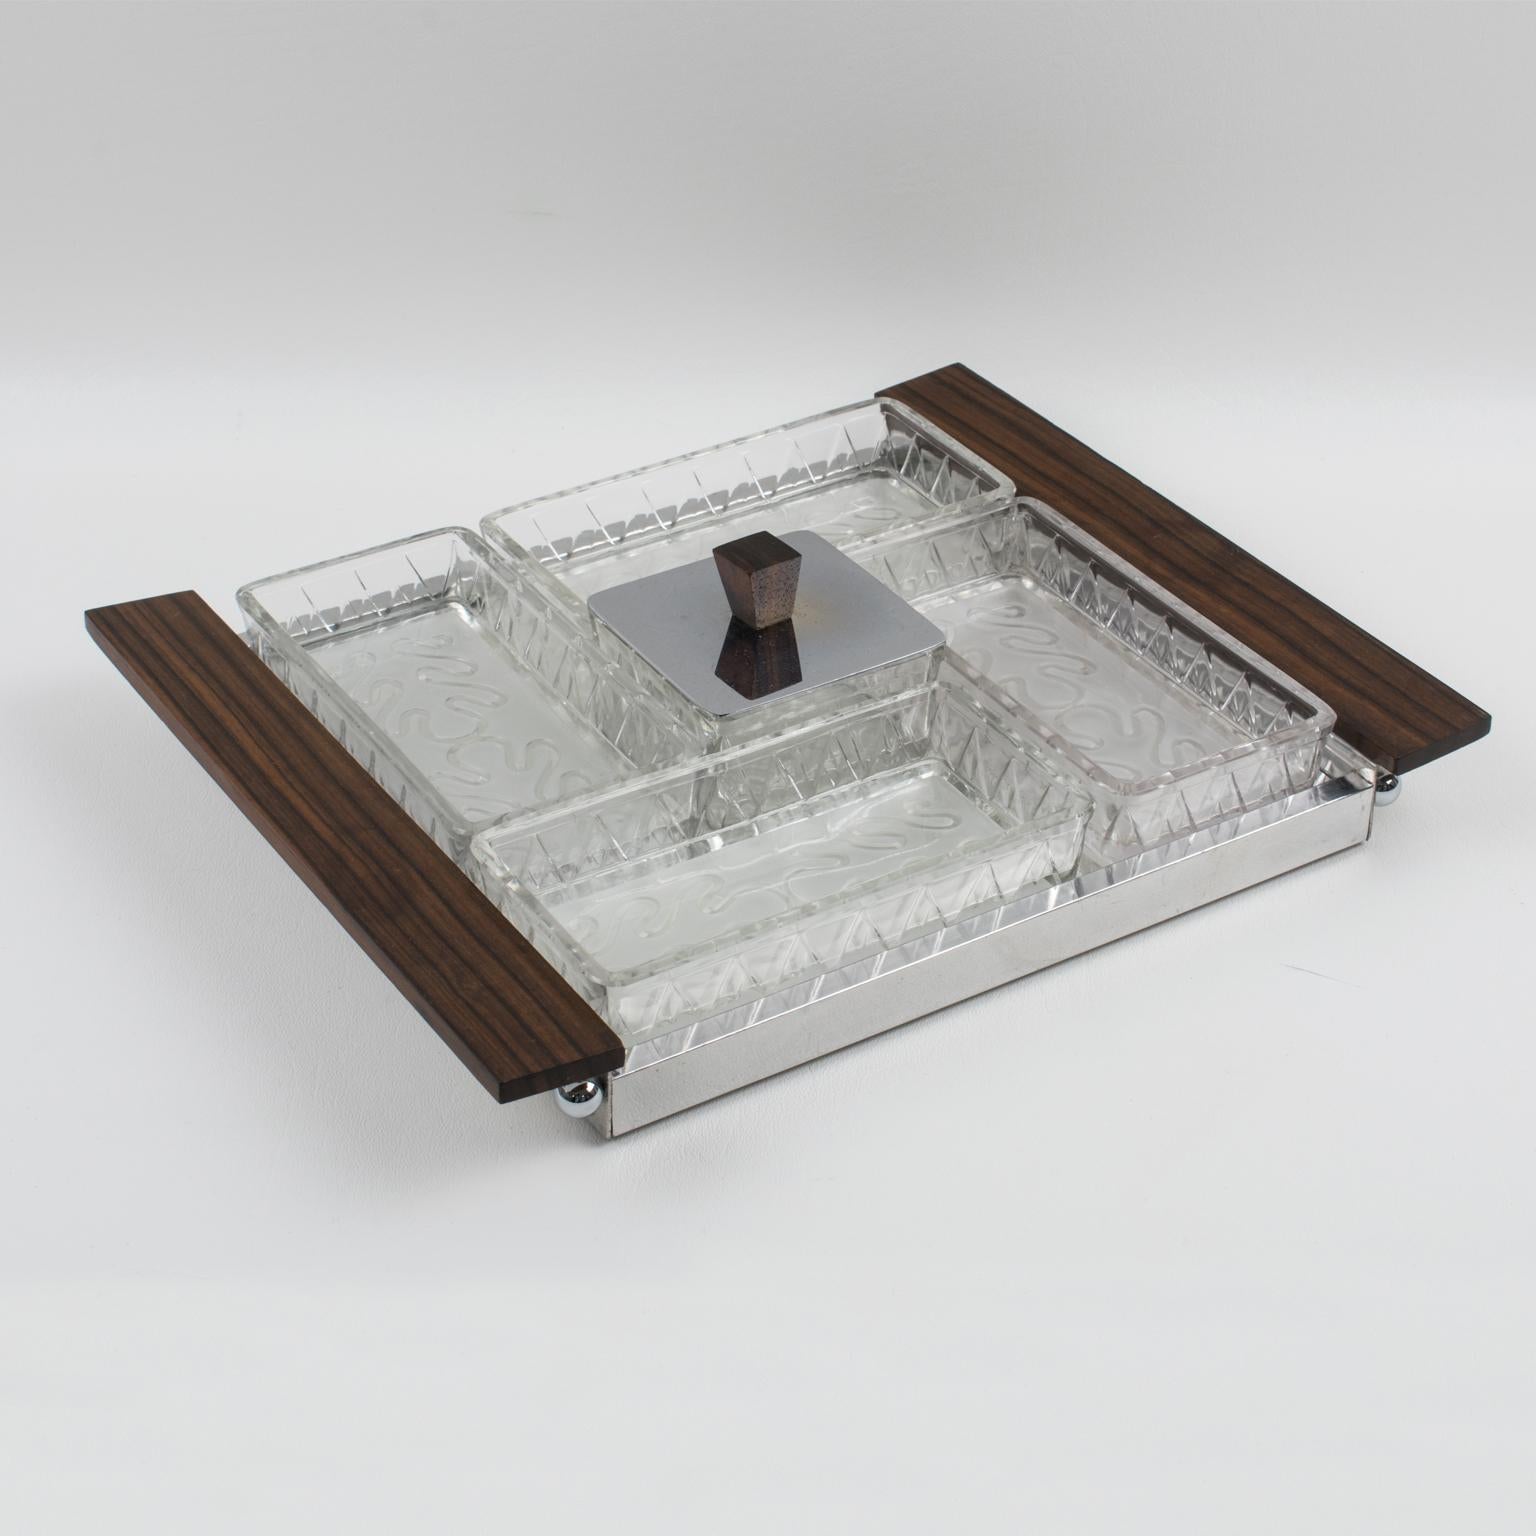 This is an elegant French Art Deco barware serving set for hors d'oeuvres, cocktails, snacks, or appetizers. The square design features a mirrored glass serving tray with a chrome gallery and Macassar wood handles. The five serving dishes for